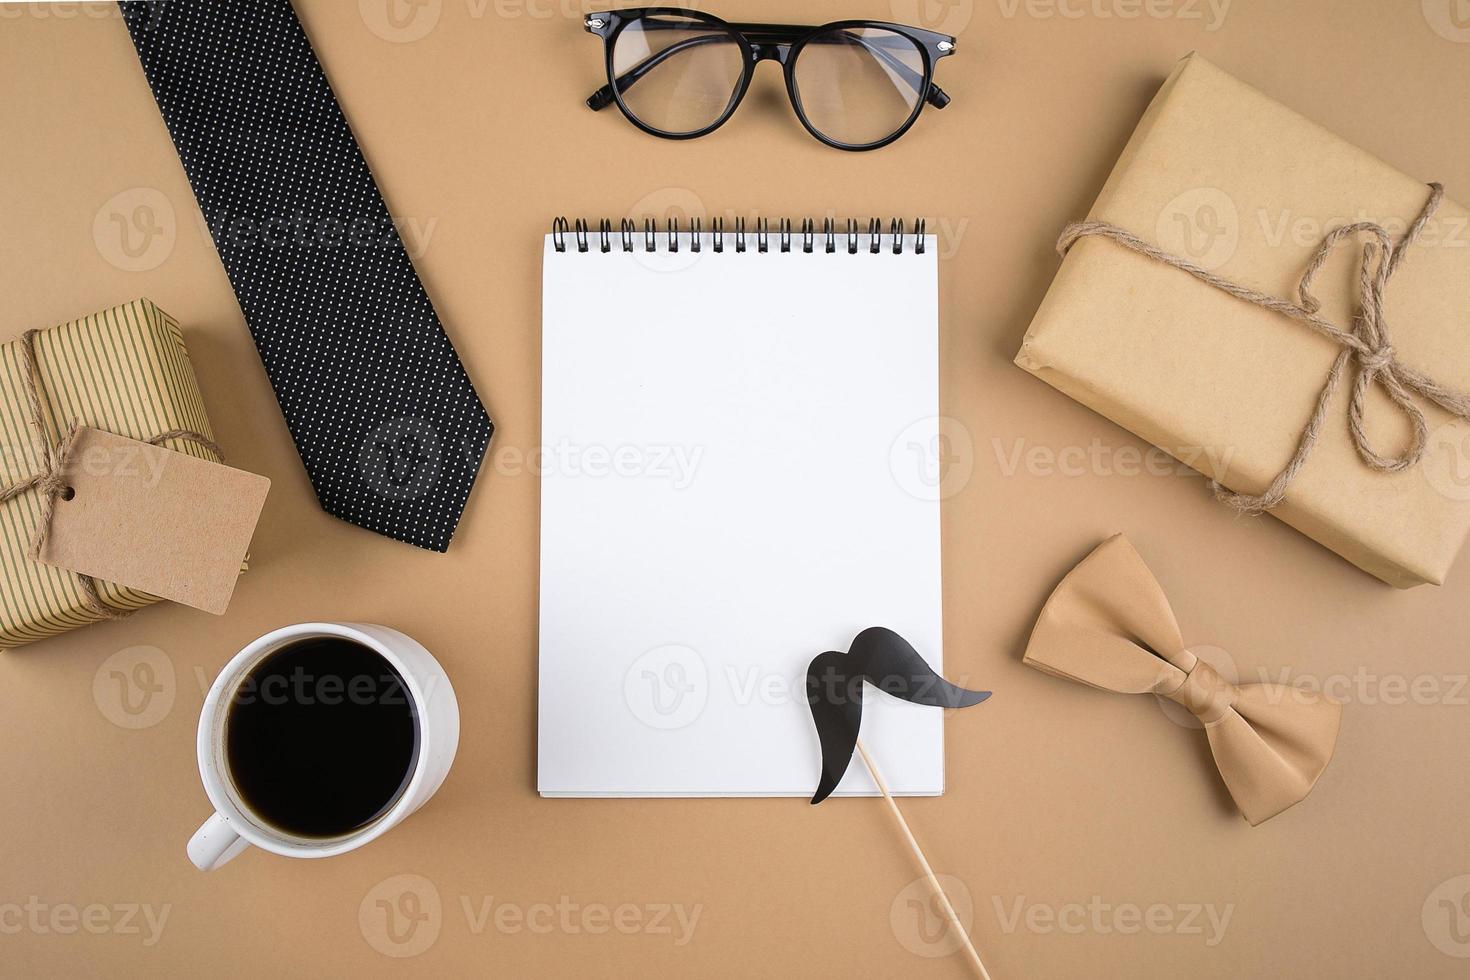 Happy Fathers Day. Gift present boxes, eyeglasses, tie, cup of coffee, butterfly photo